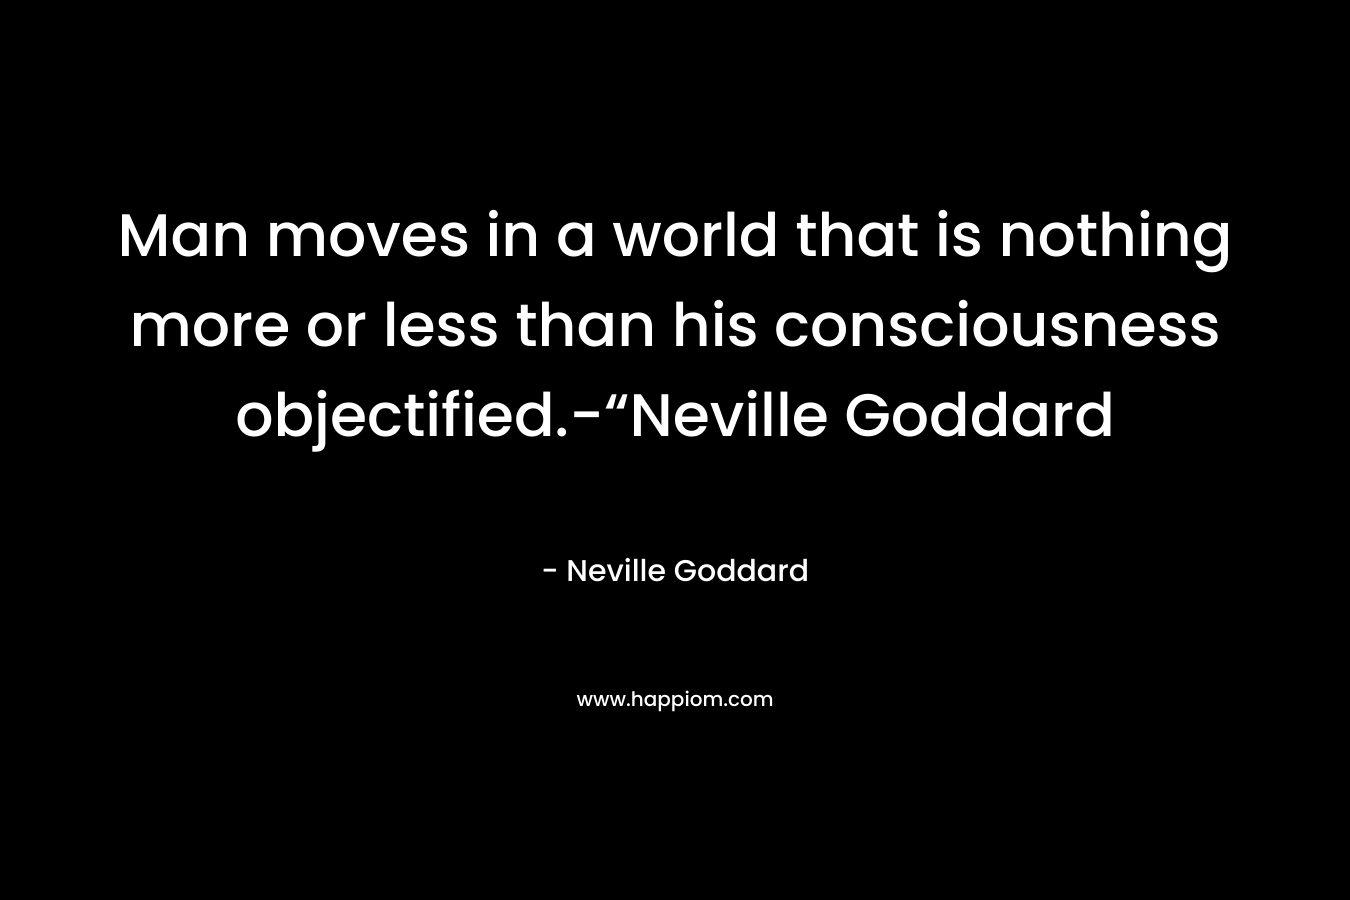 Man moves in a world that is nothing more or less than his consciousness objectified.-“Neville Goddard